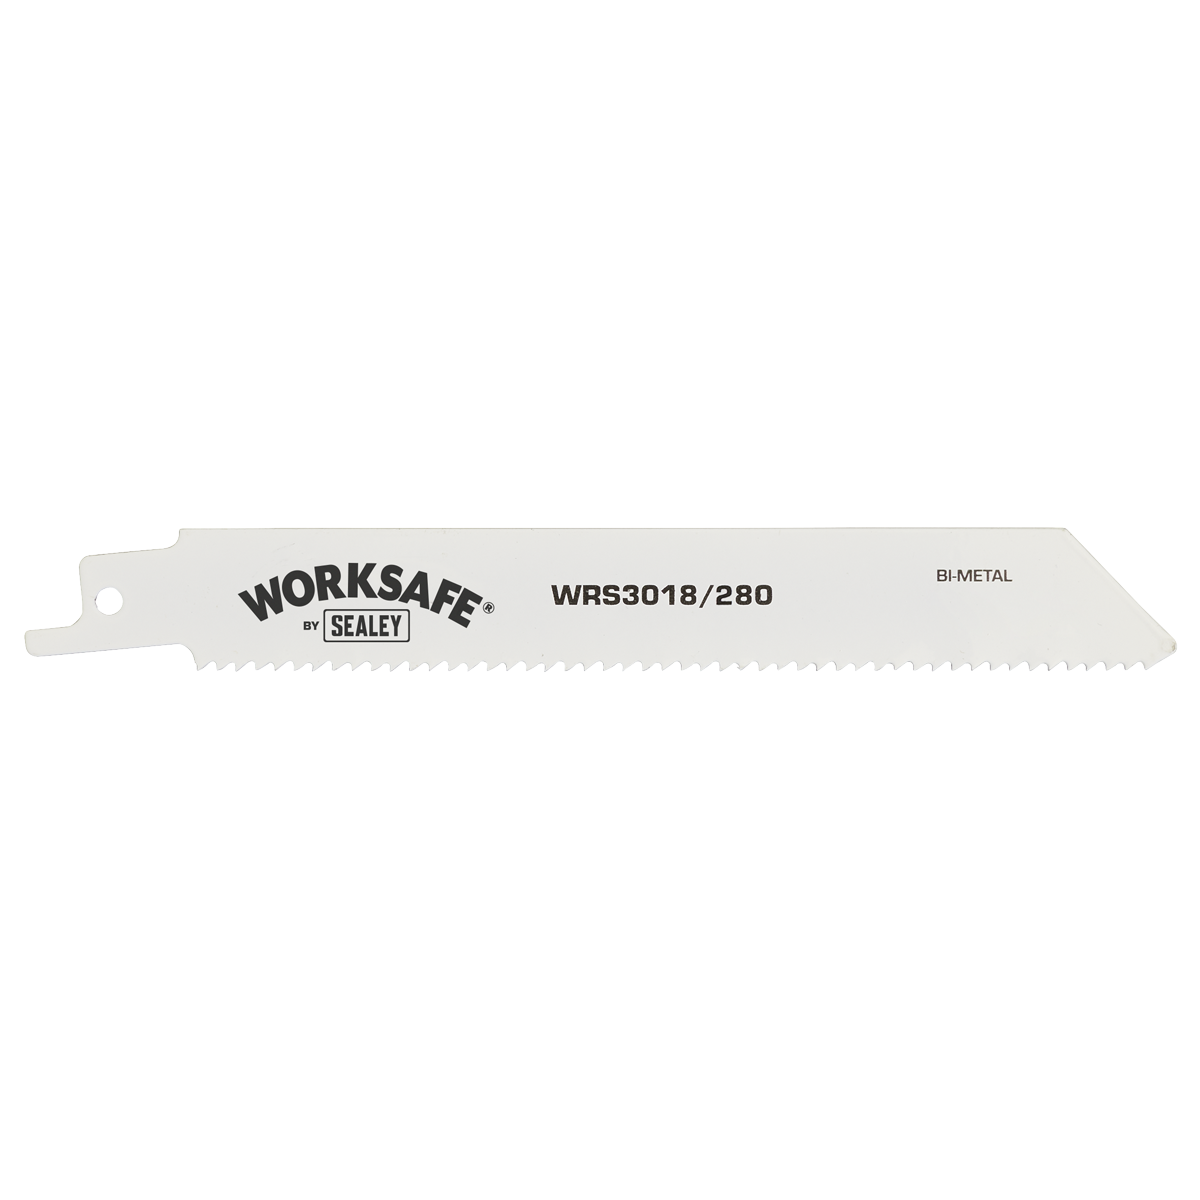 Sealey WRS3018/280 Reciprocating Saw Blade 280mm 10tpi - Pack of 5